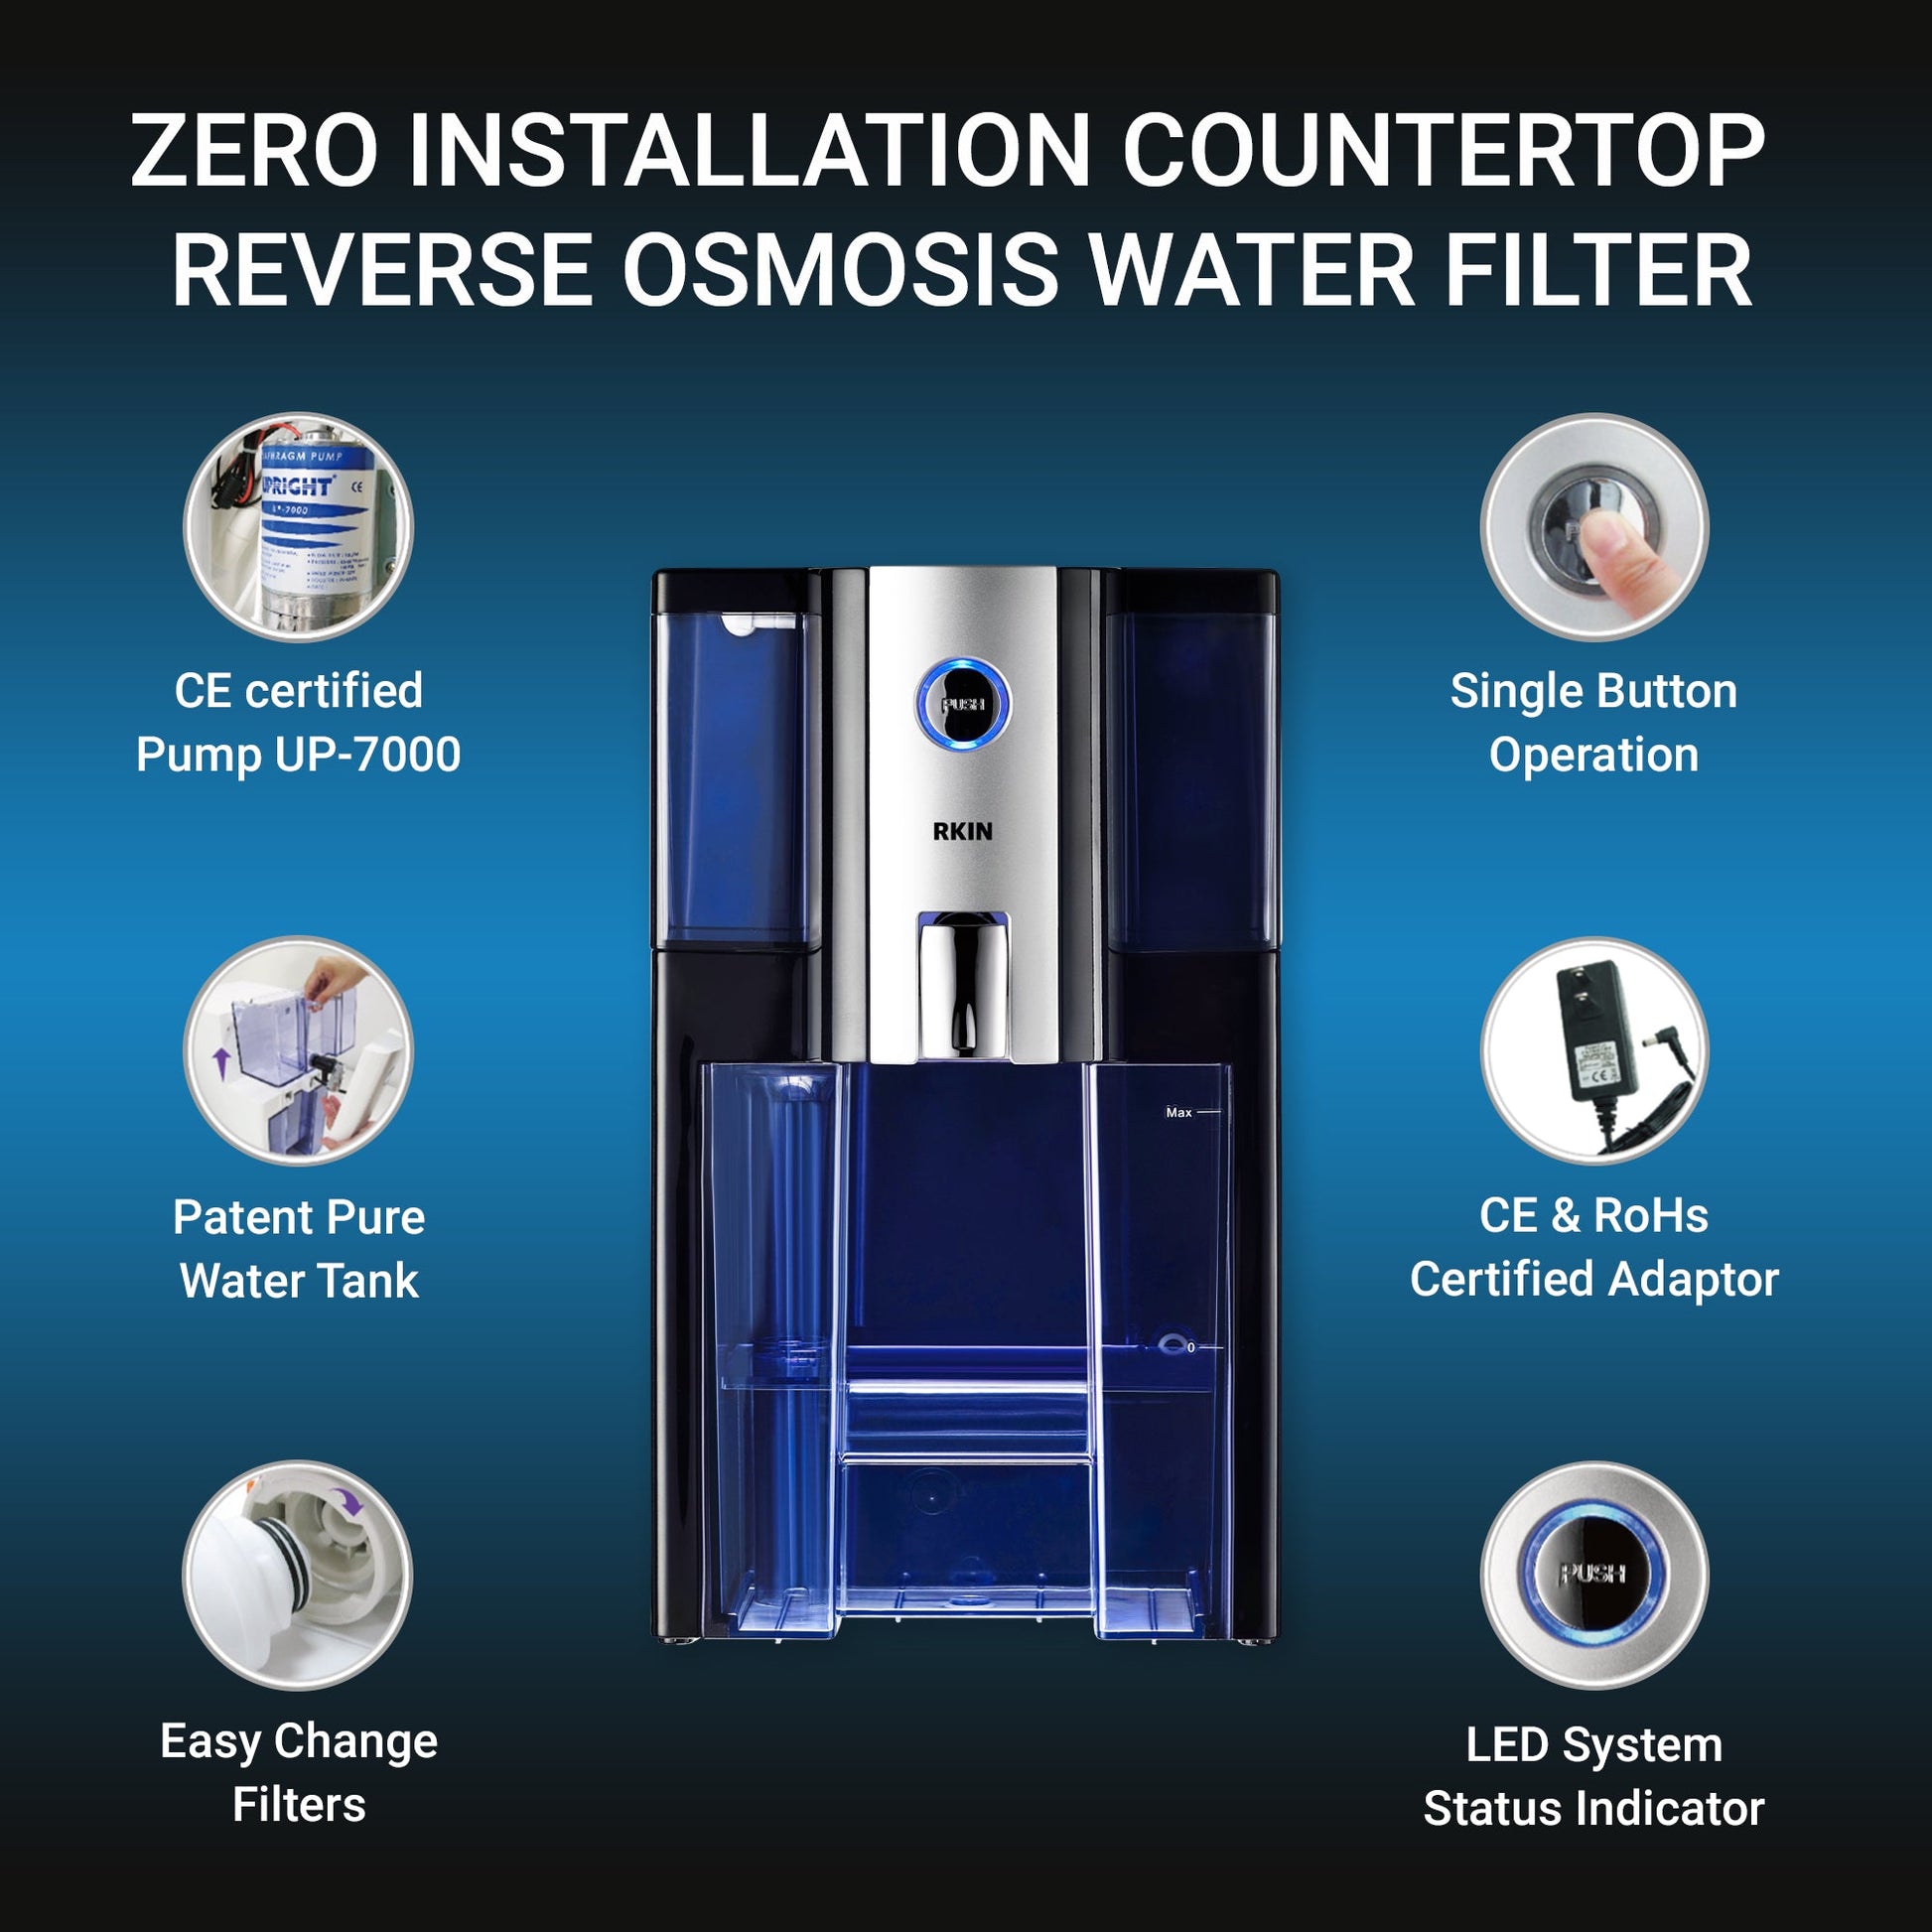 ZeroWater 6-Cup 5-Stage Water Filter Pitcher 0 TDS for Improved Tap Water  Taste - IAPMO Certified to Reduce Lead, Chromium, and PFOA/PFOS